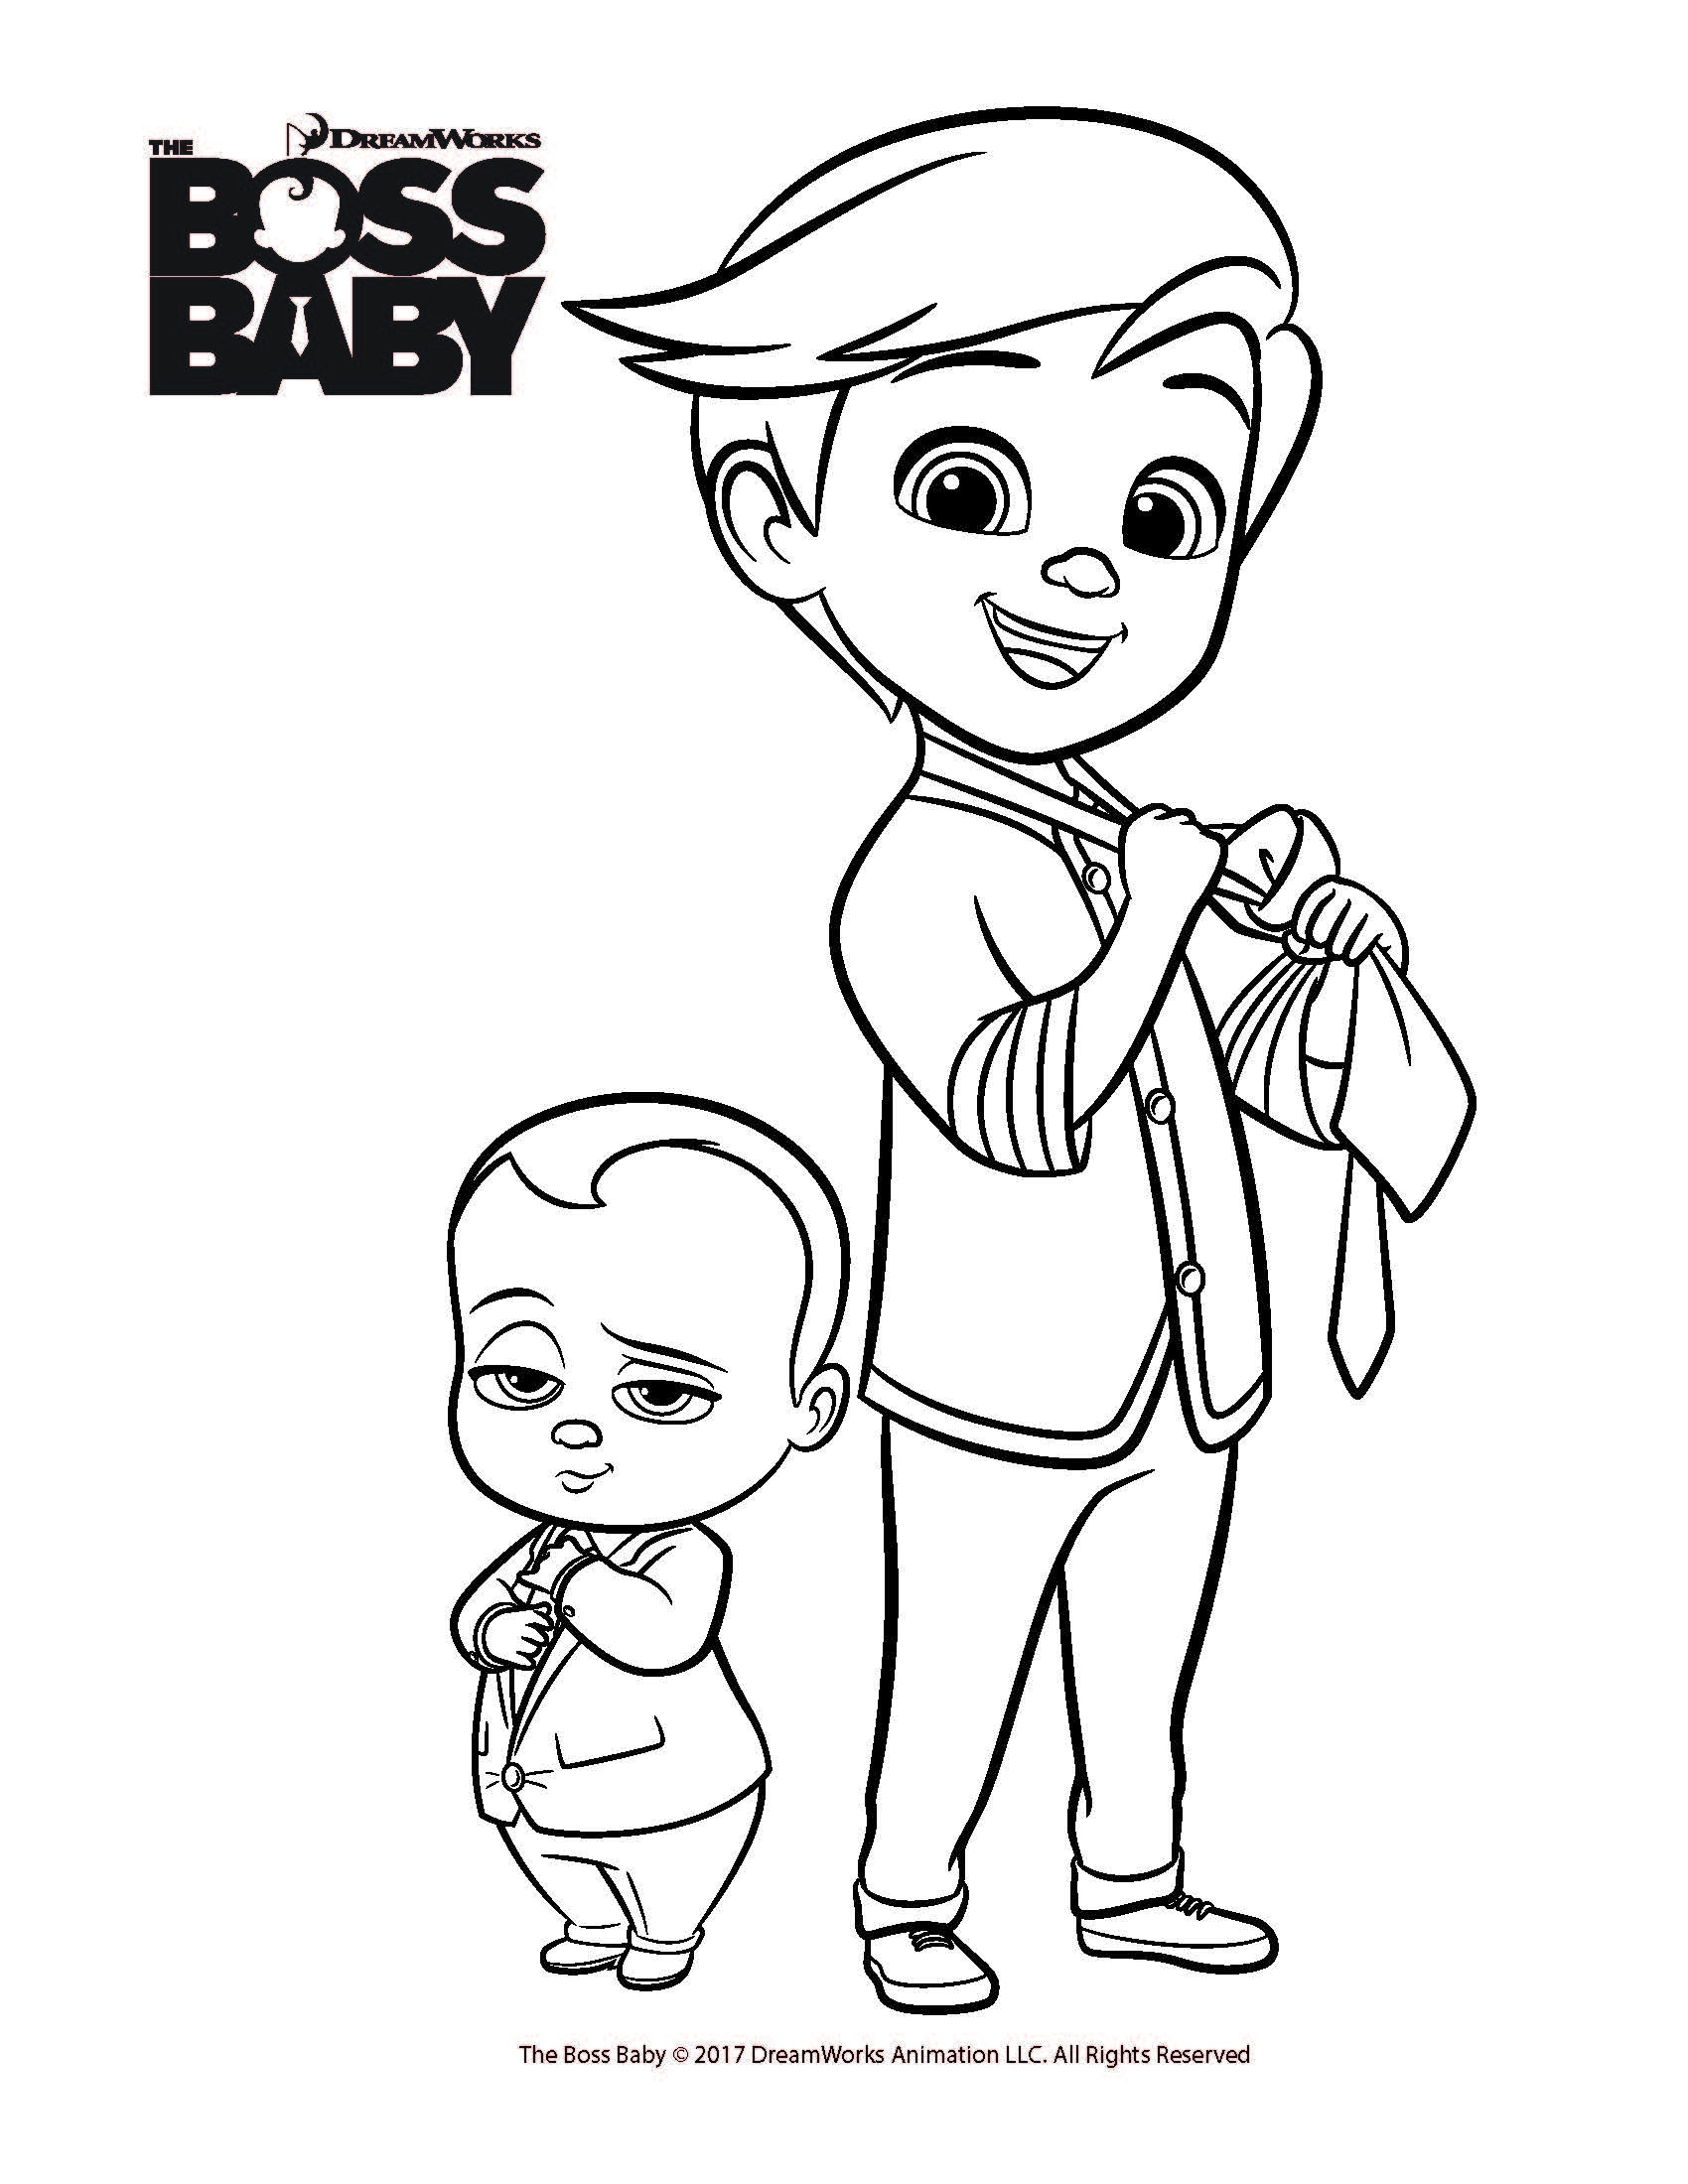 Boss Baby Coloring Page
 The Boss Baby Coloring Pages at GetDrawings